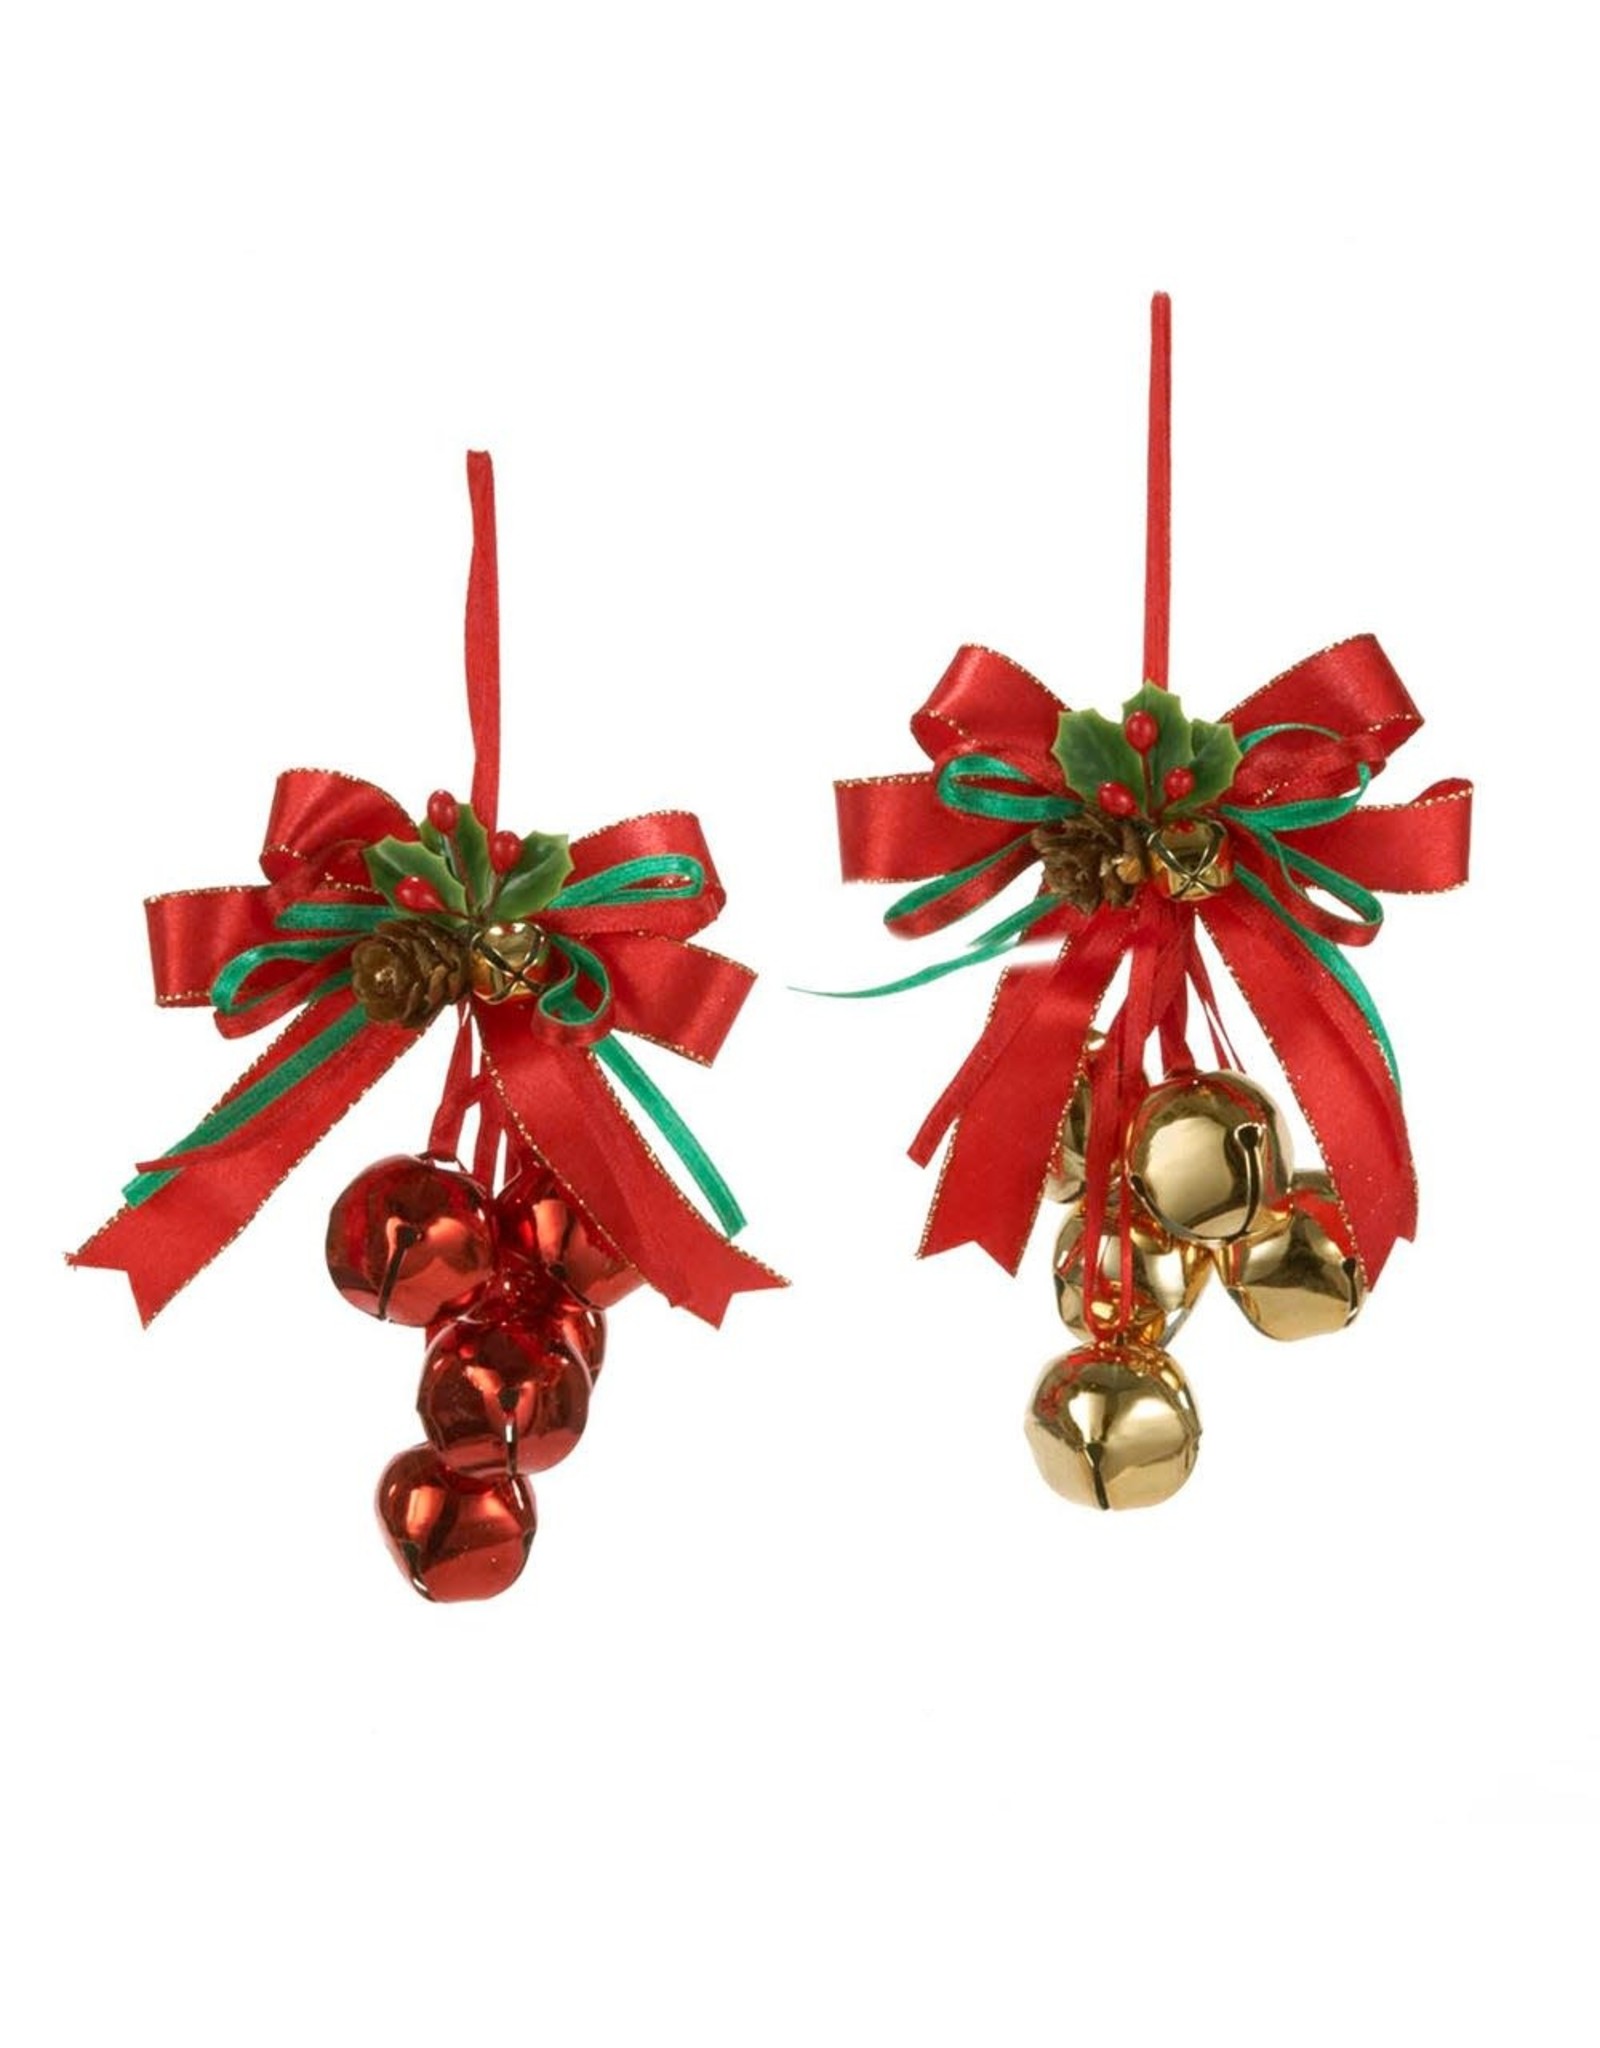 Kurt Adler Metal Red And Gold Bells With Bow Ornaments 2 Assorted